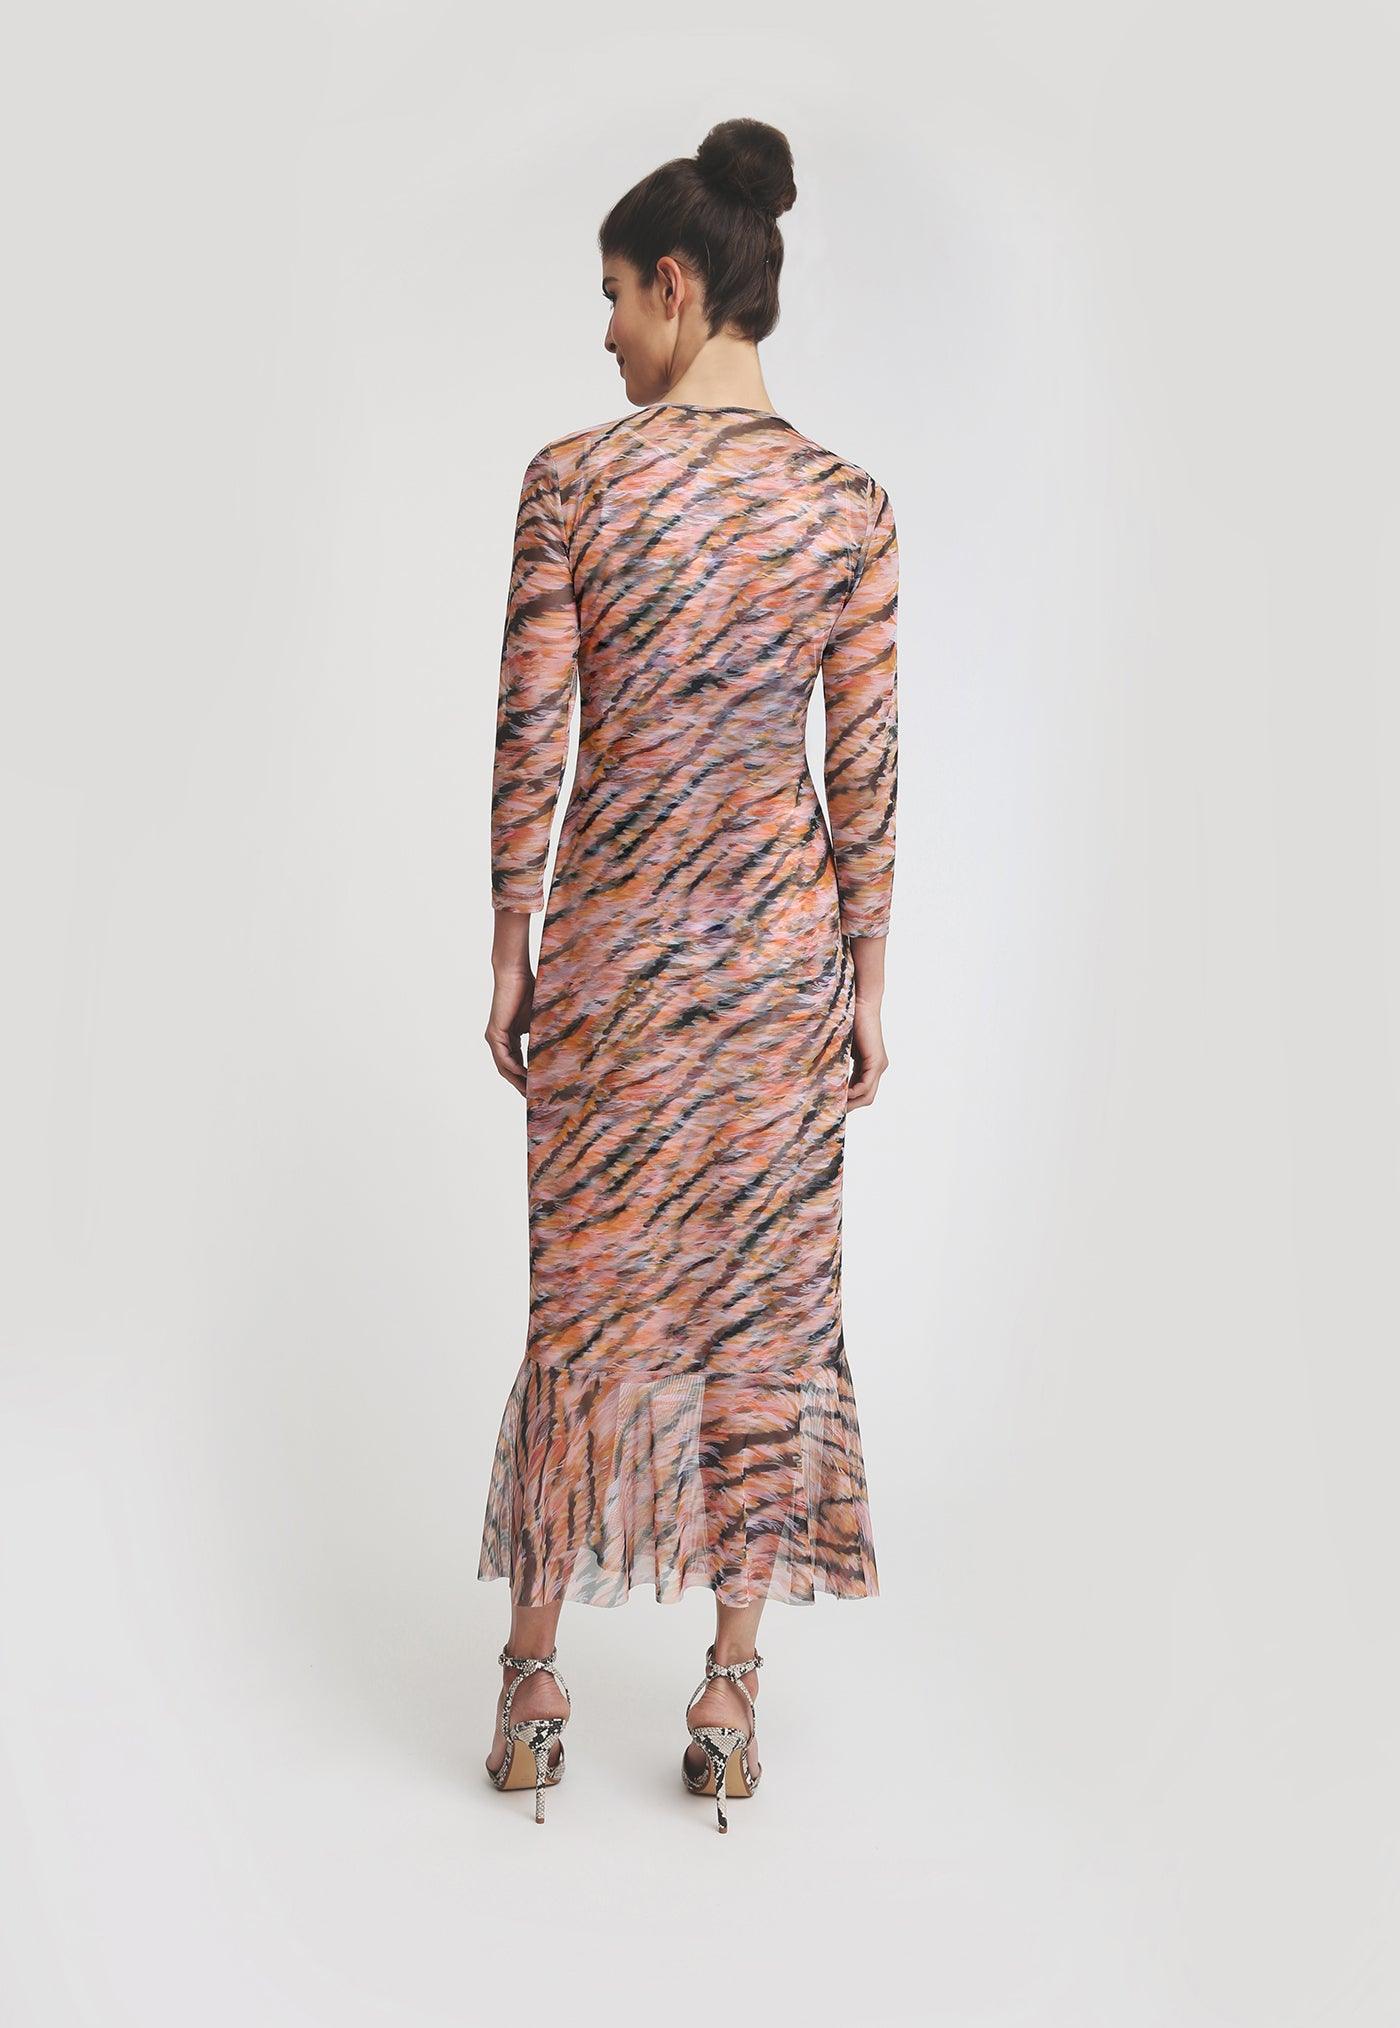 pink and orange tiger stripe printed mesh short dress with ruffled bottoms layered over short stretch knit tiger printed dress